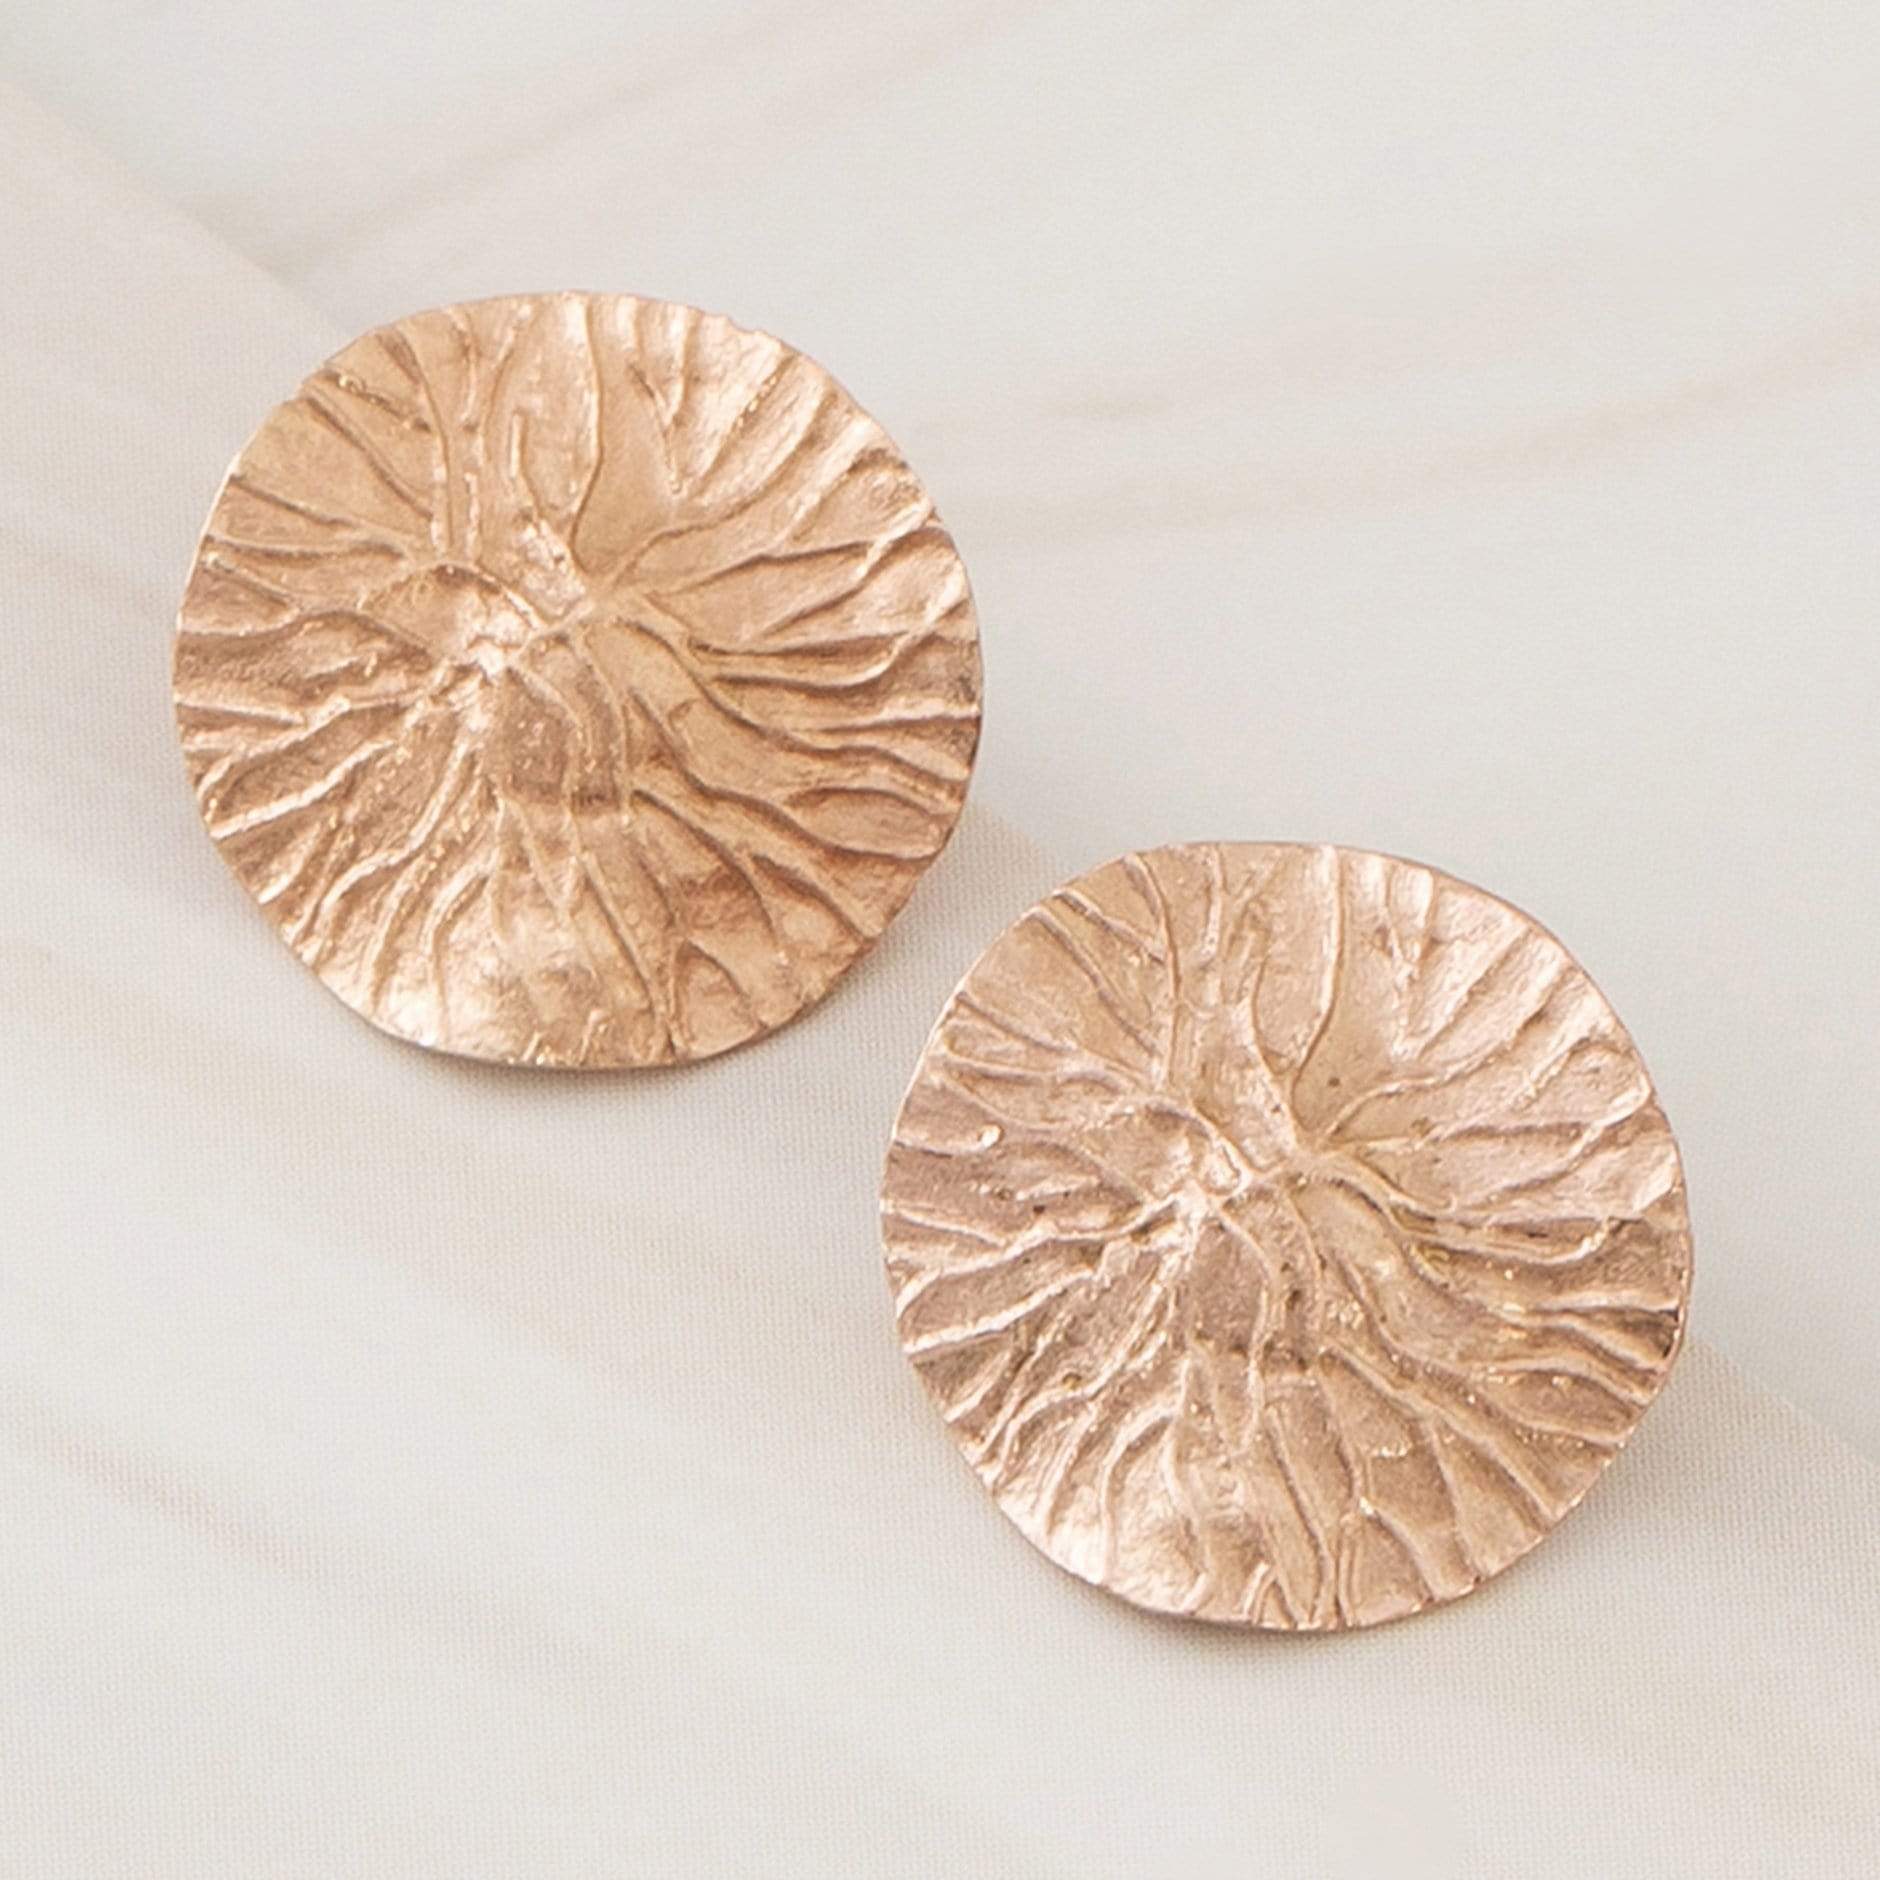 Emblem Jewelry Earrings Rose Gold Tone Large Lily Pad Disc Statement Earrings